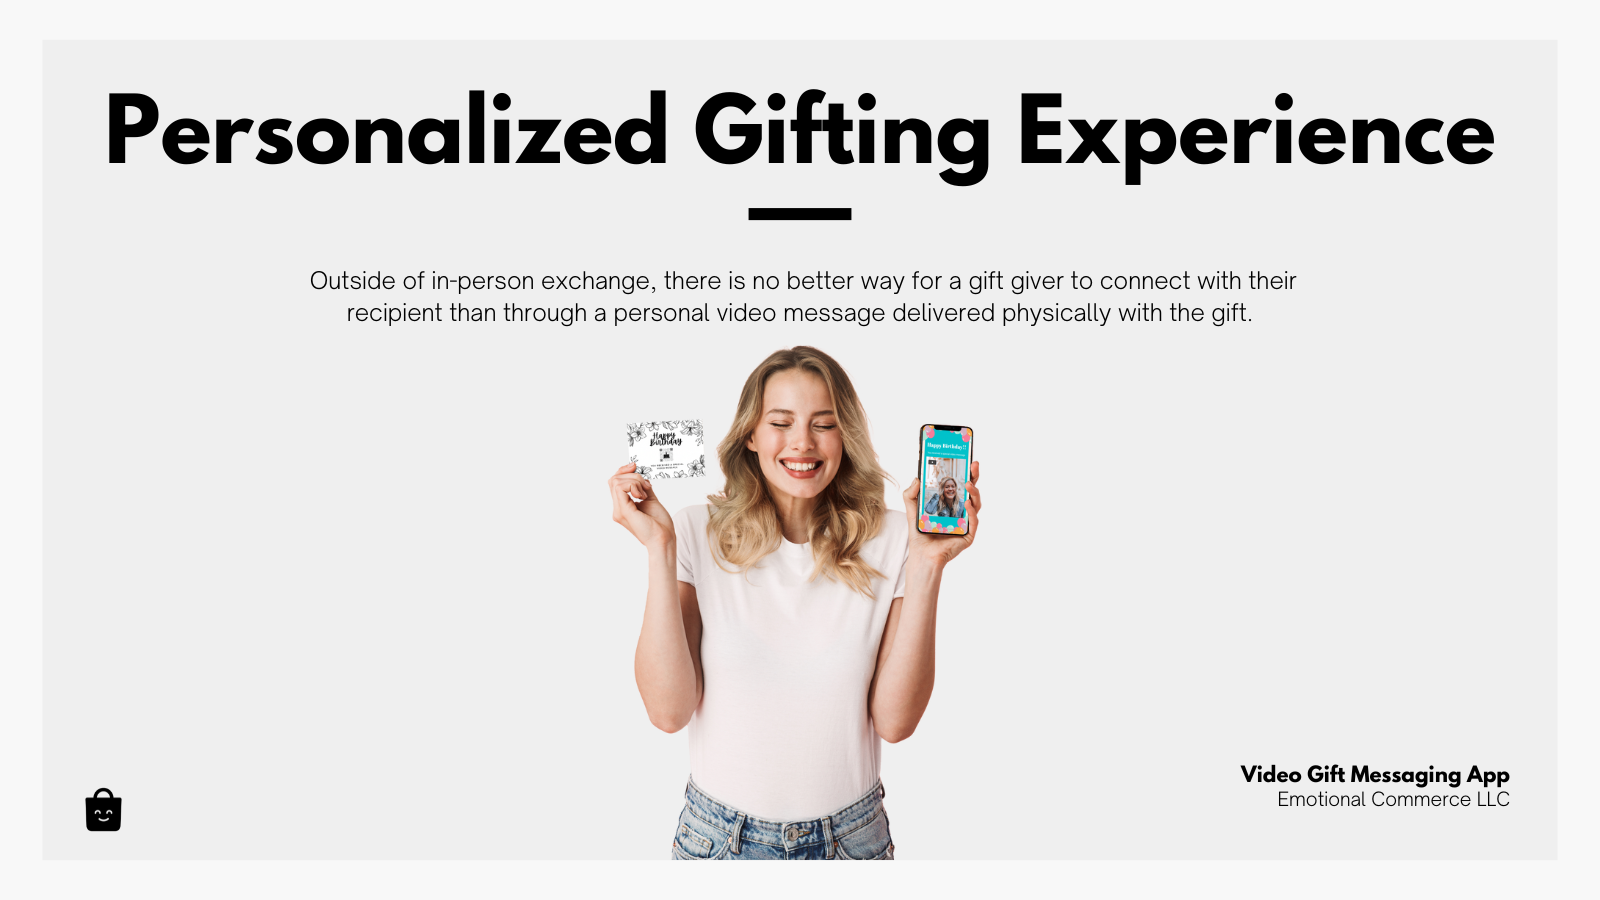 Personalized Gifting Experience